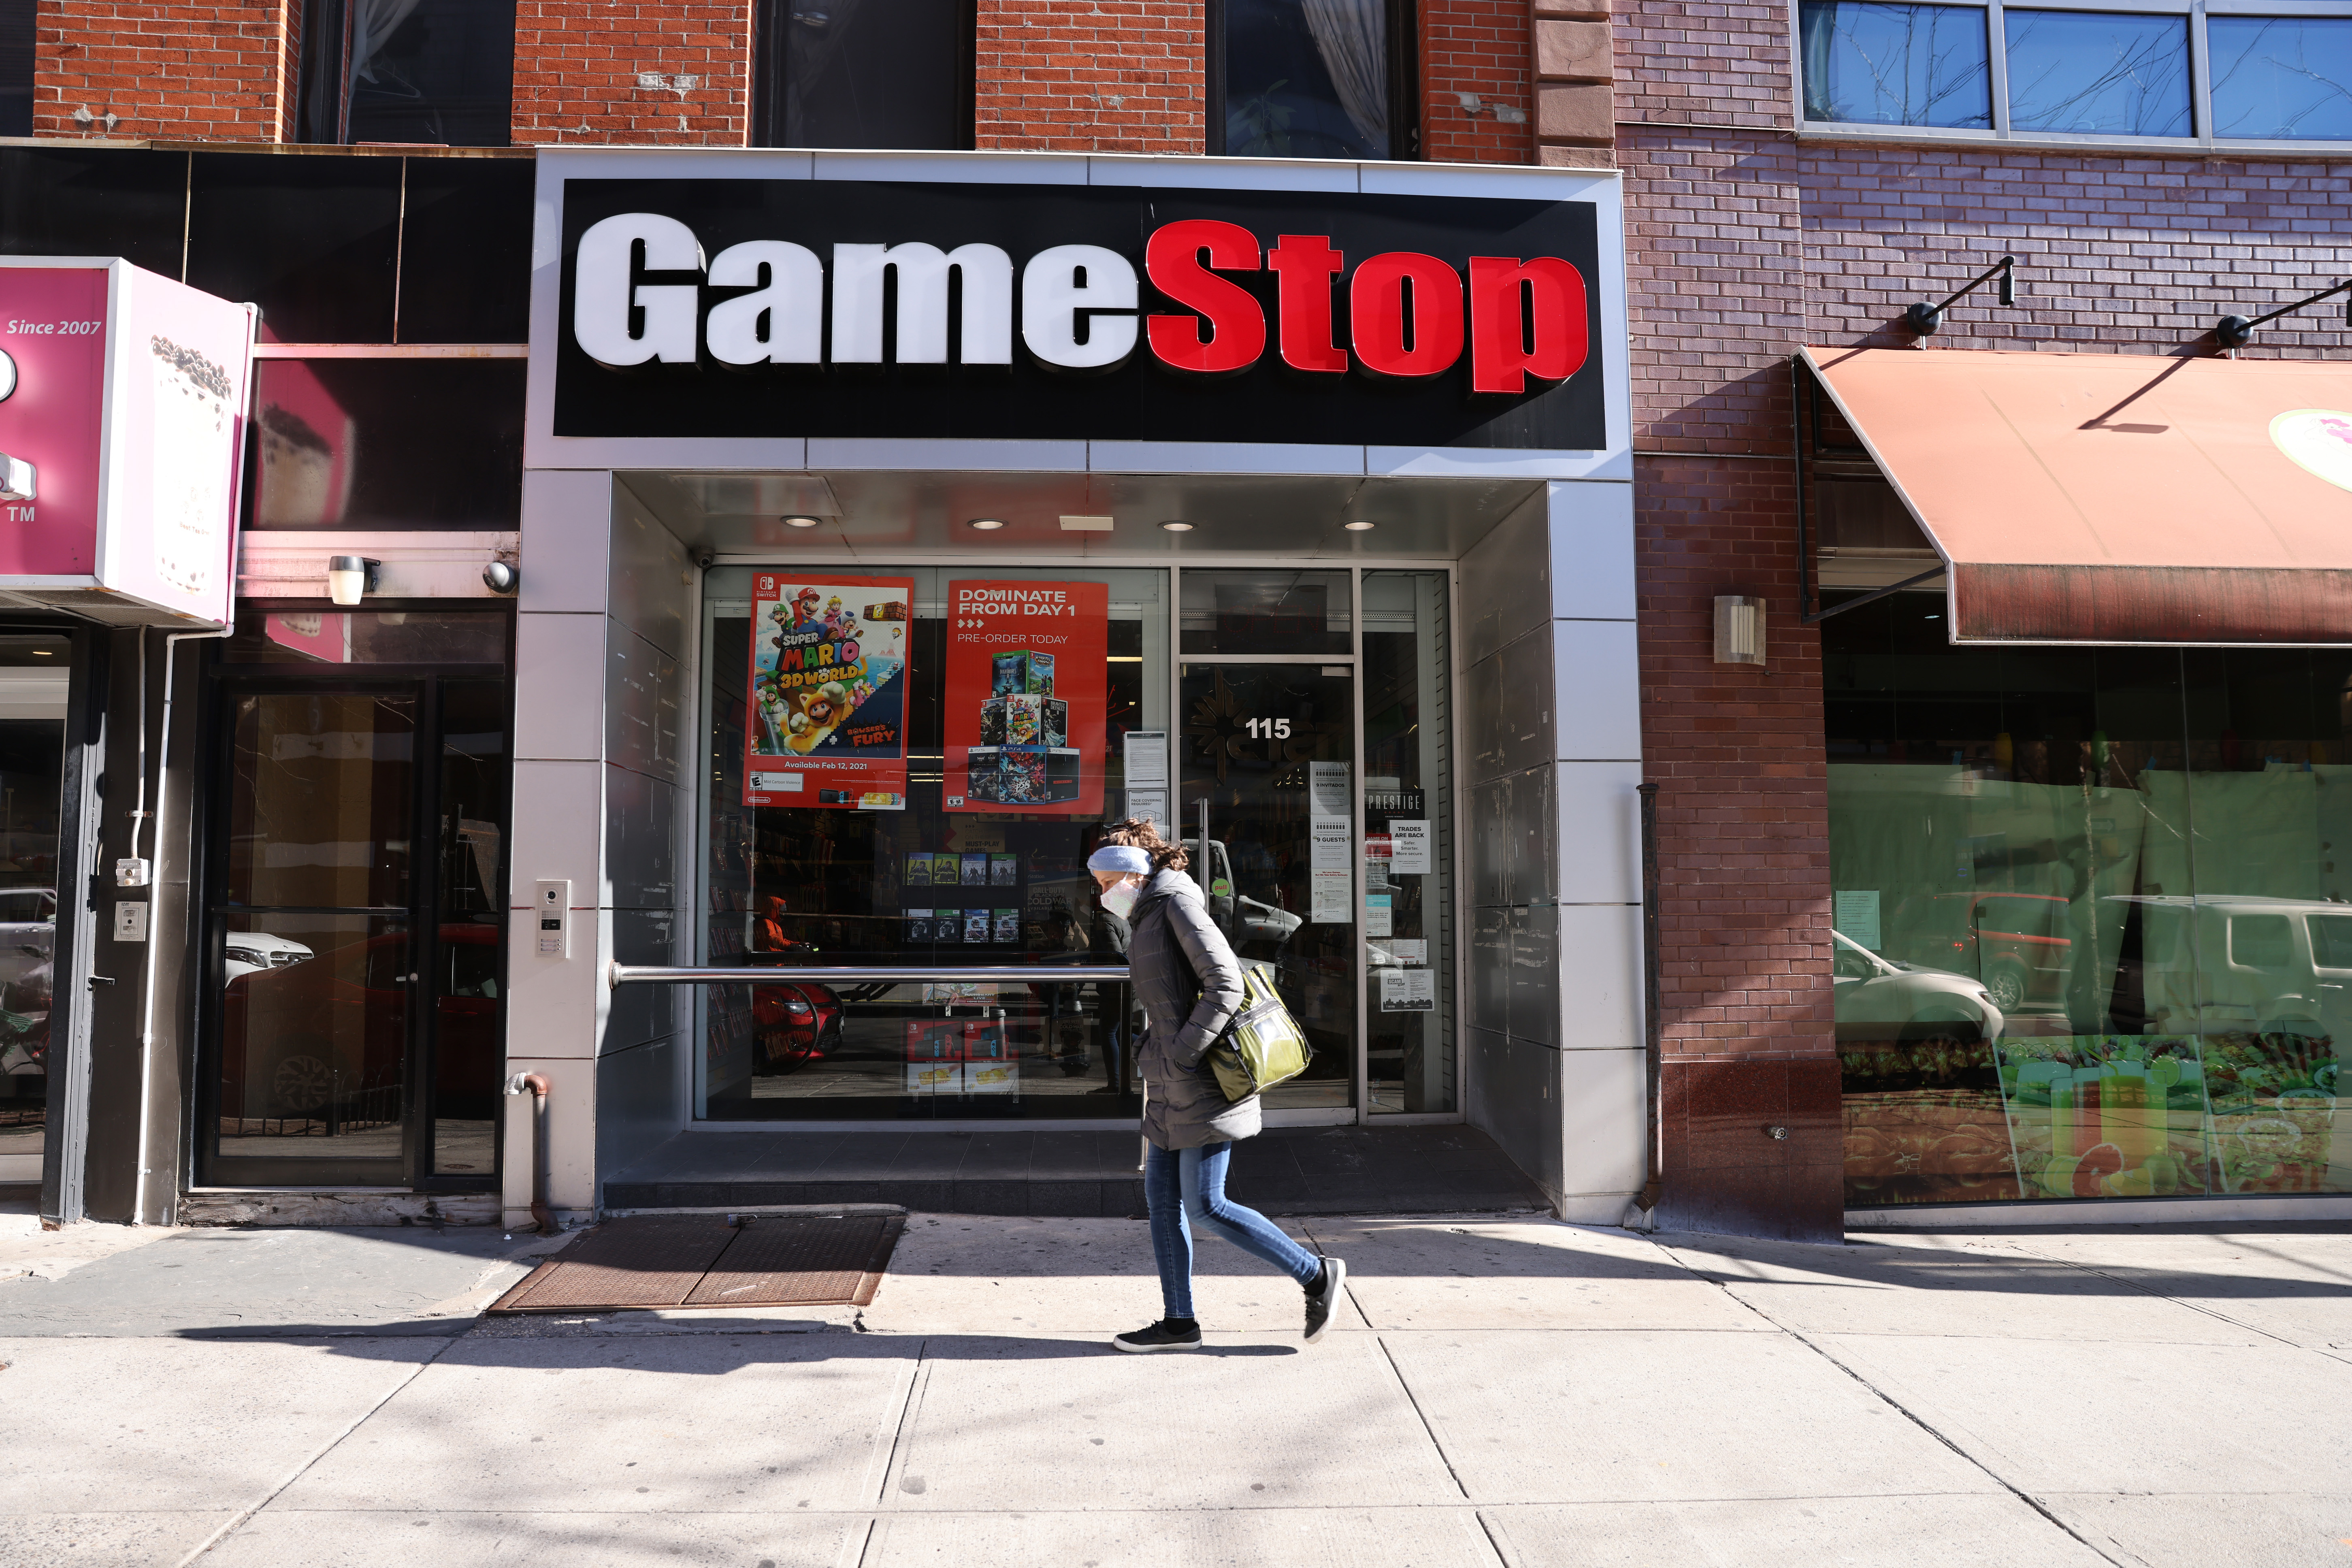 How a Reddit User and His Friends Helped Fuel the GameStop Frenzy